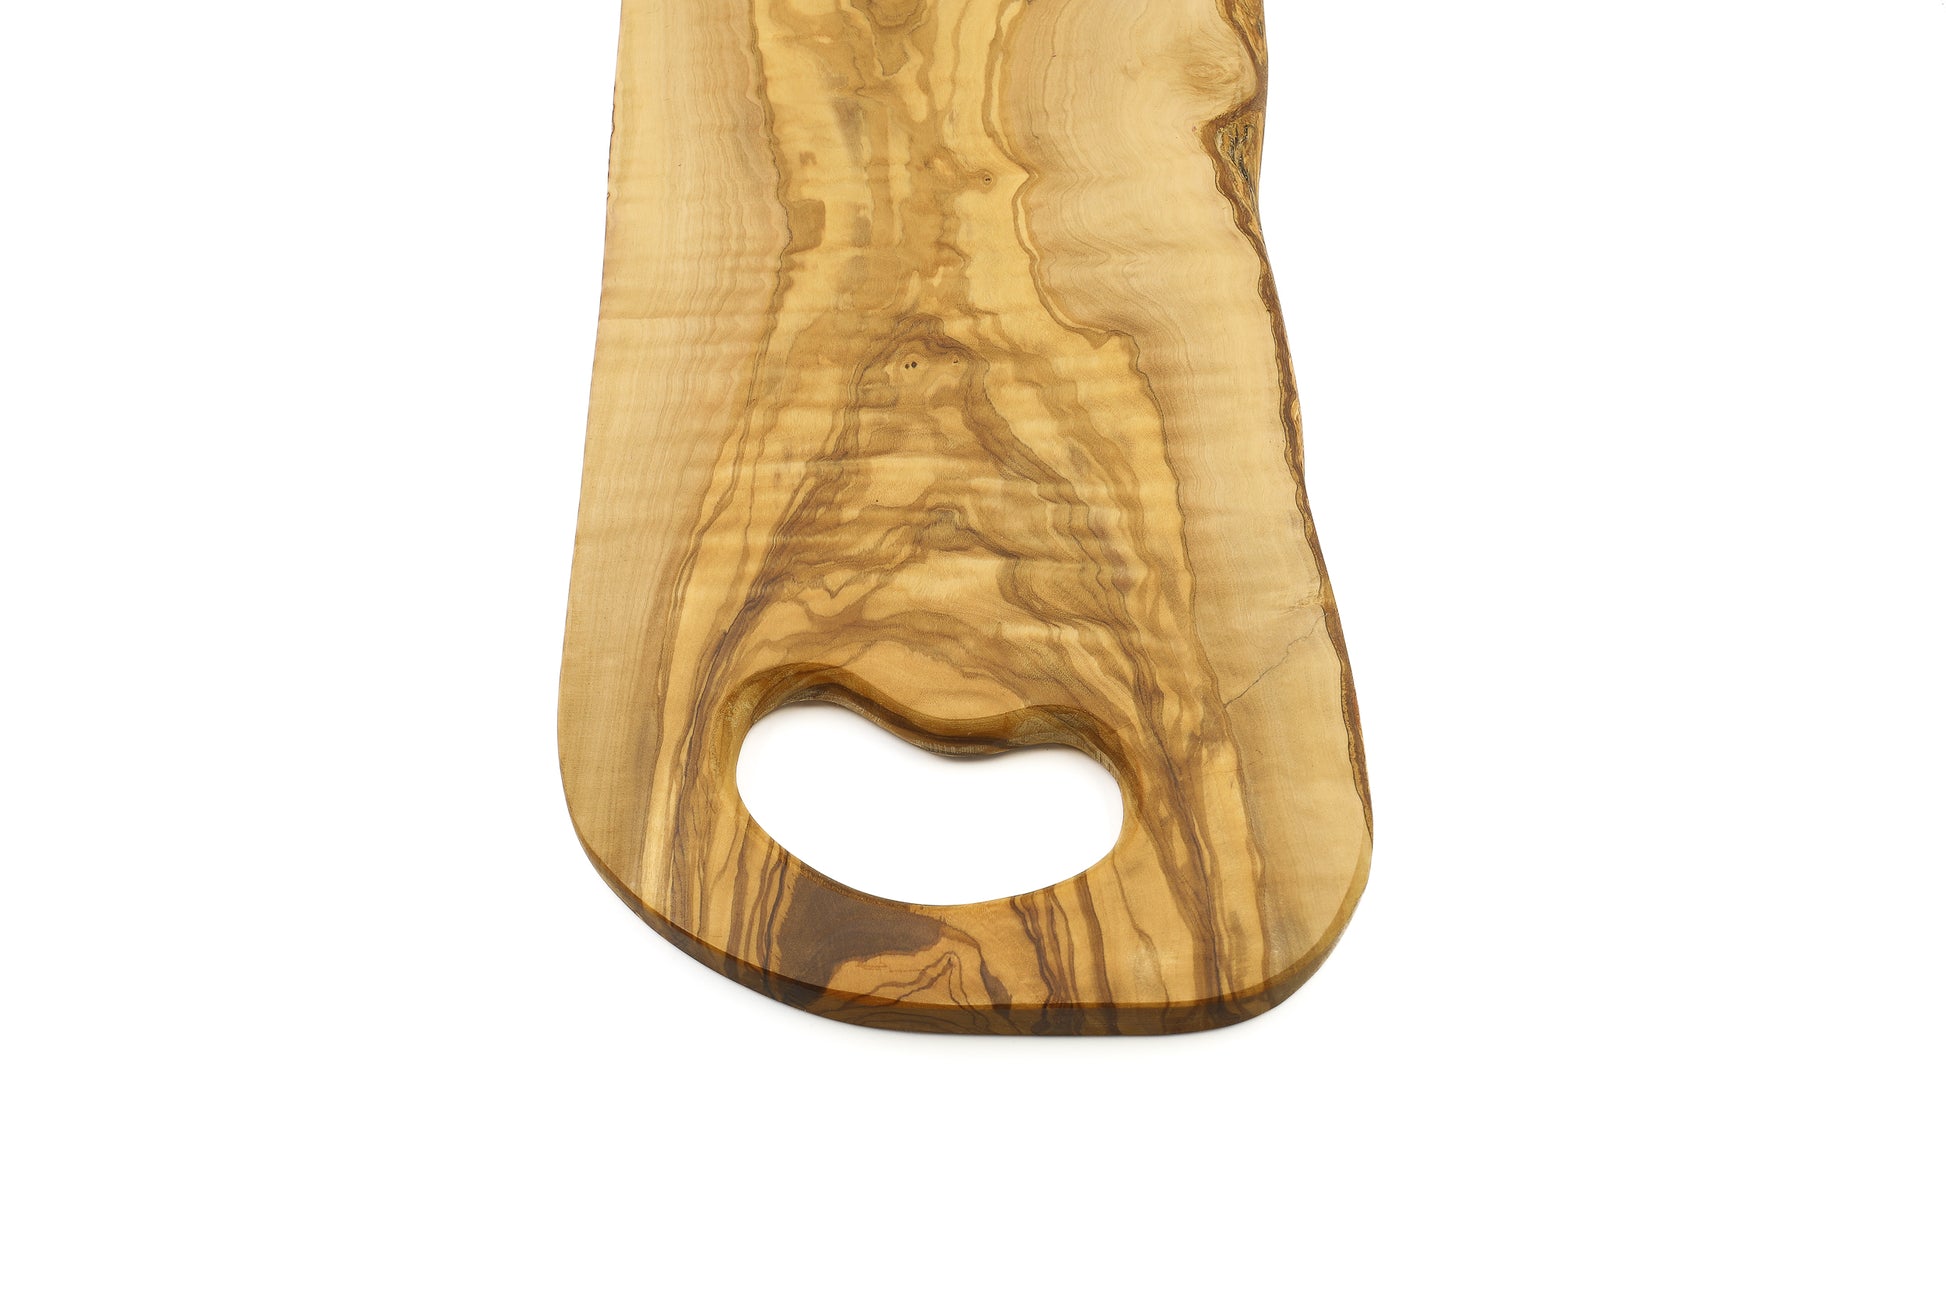 Hand-shaped olive wood cutting board with an in-hand handle for easy use